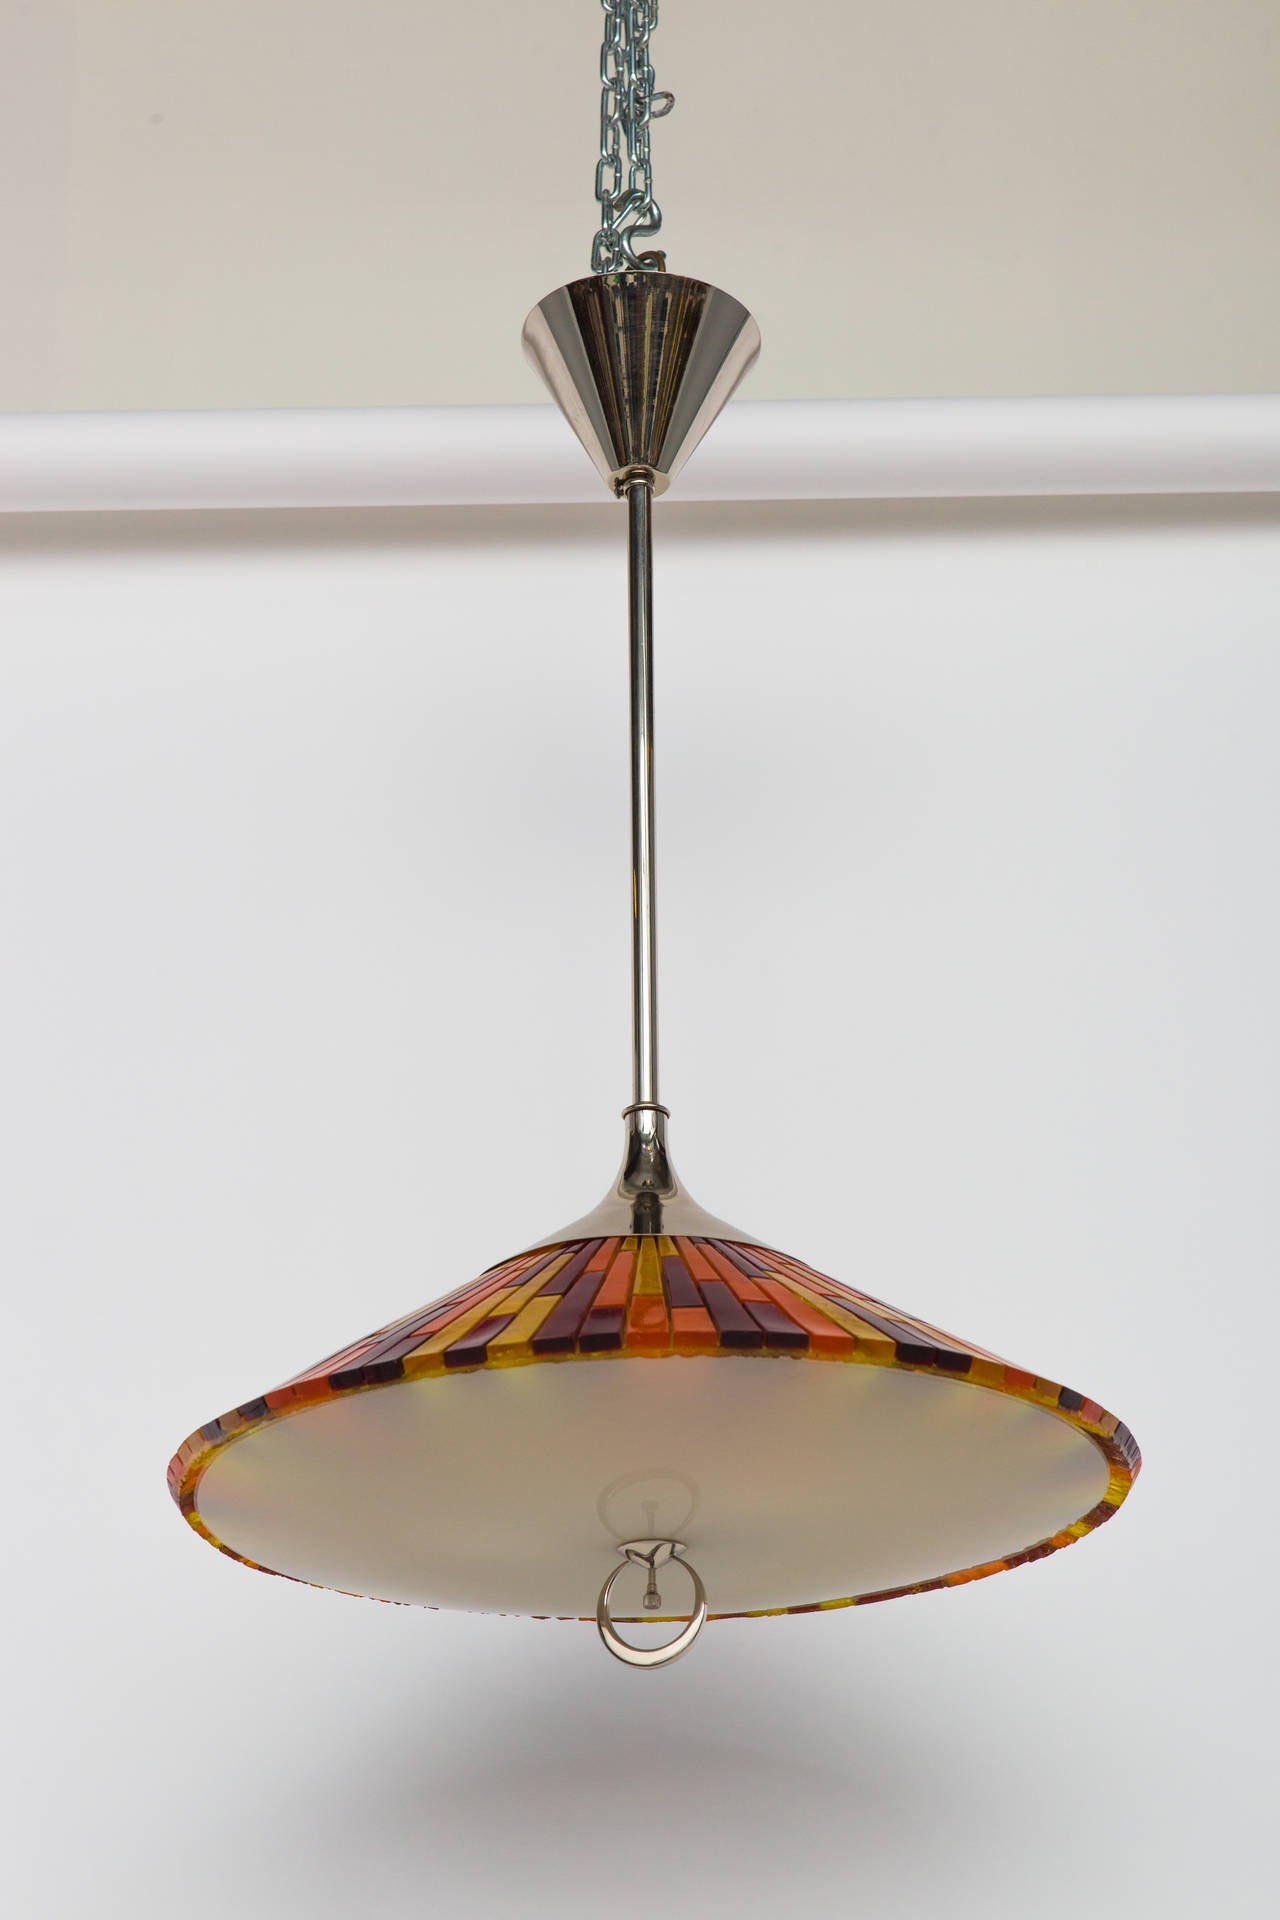 Italian pendant composed of colorful acrylic elements. Nickel-plated hardware with opaque glass diffuser. Ornamental metal ring contains a on/off switch. Restored and rewired with three sockets.